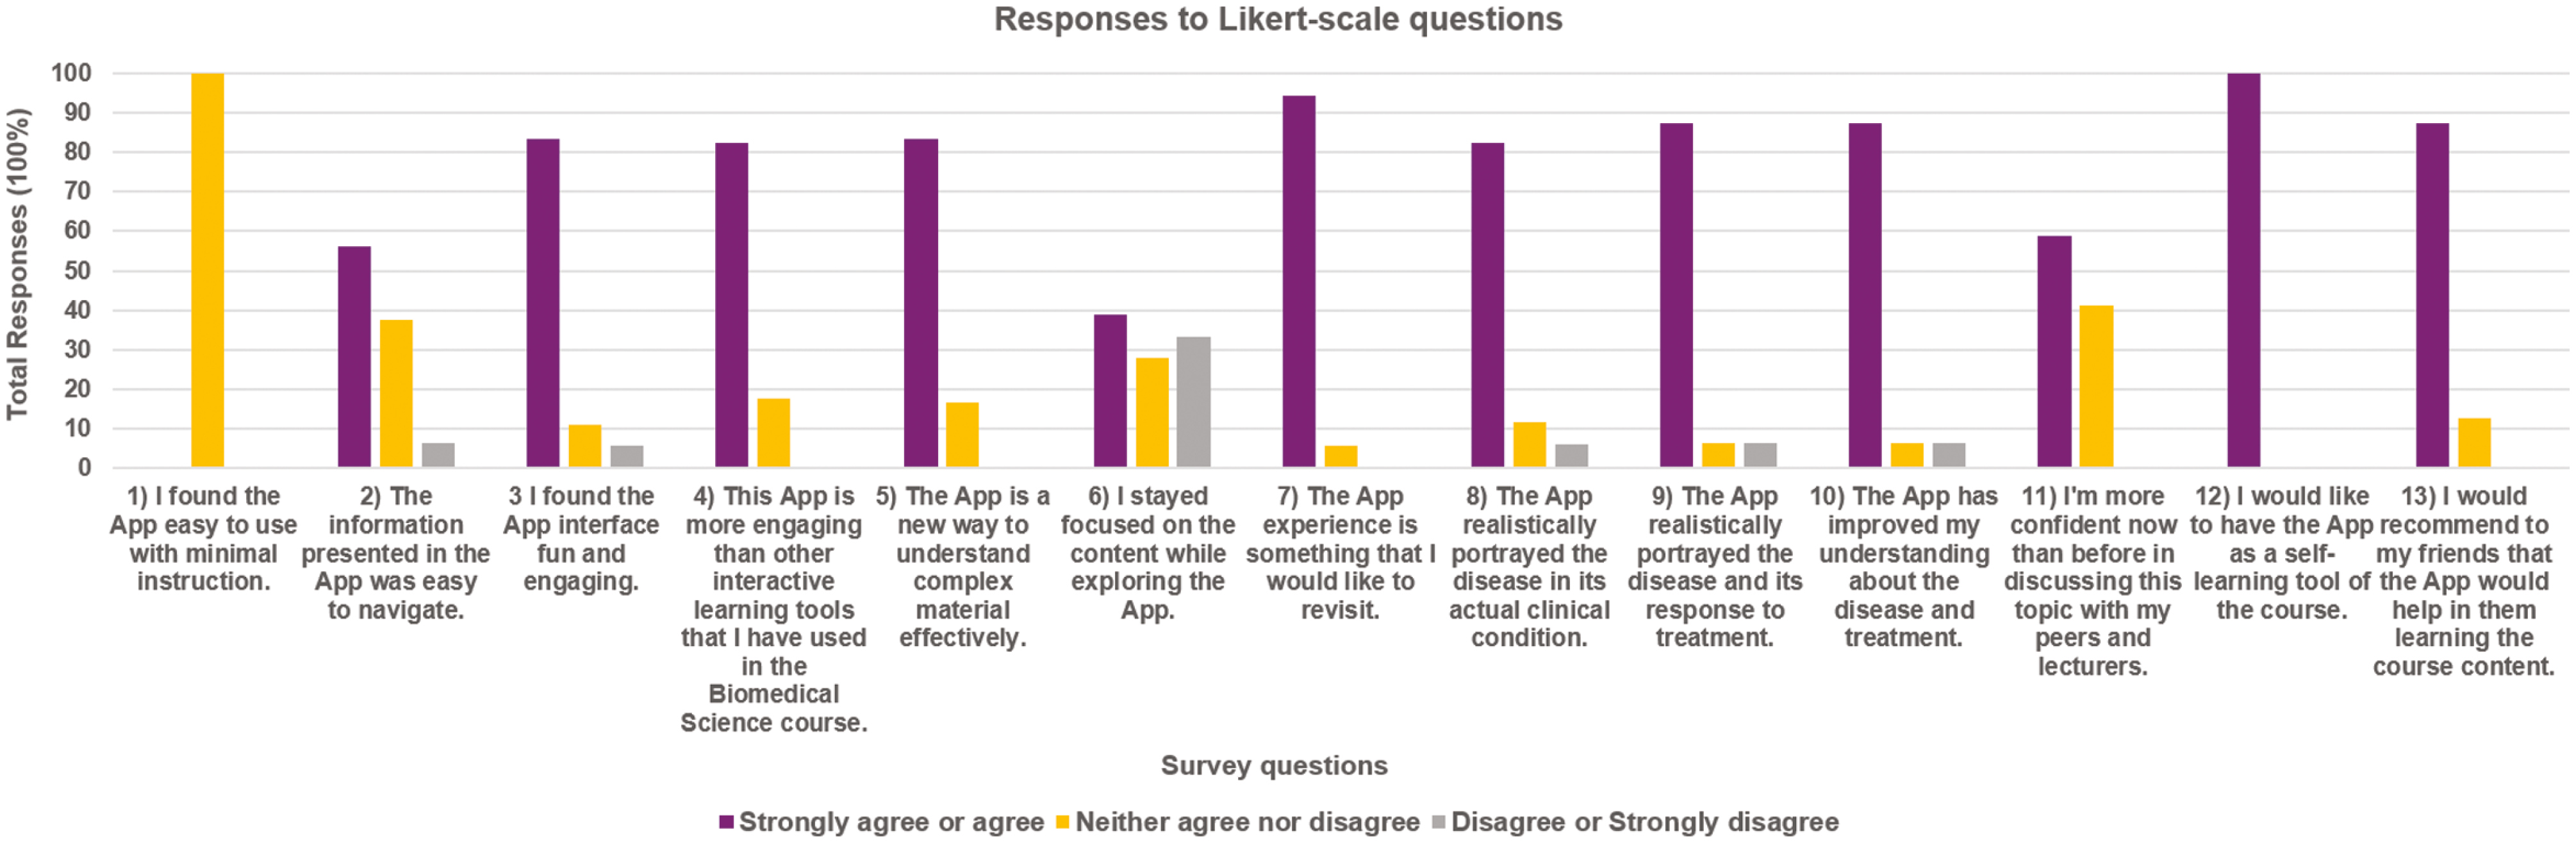 Biomedical science students’ responses (22%) to the revised version of the AR App in 2021